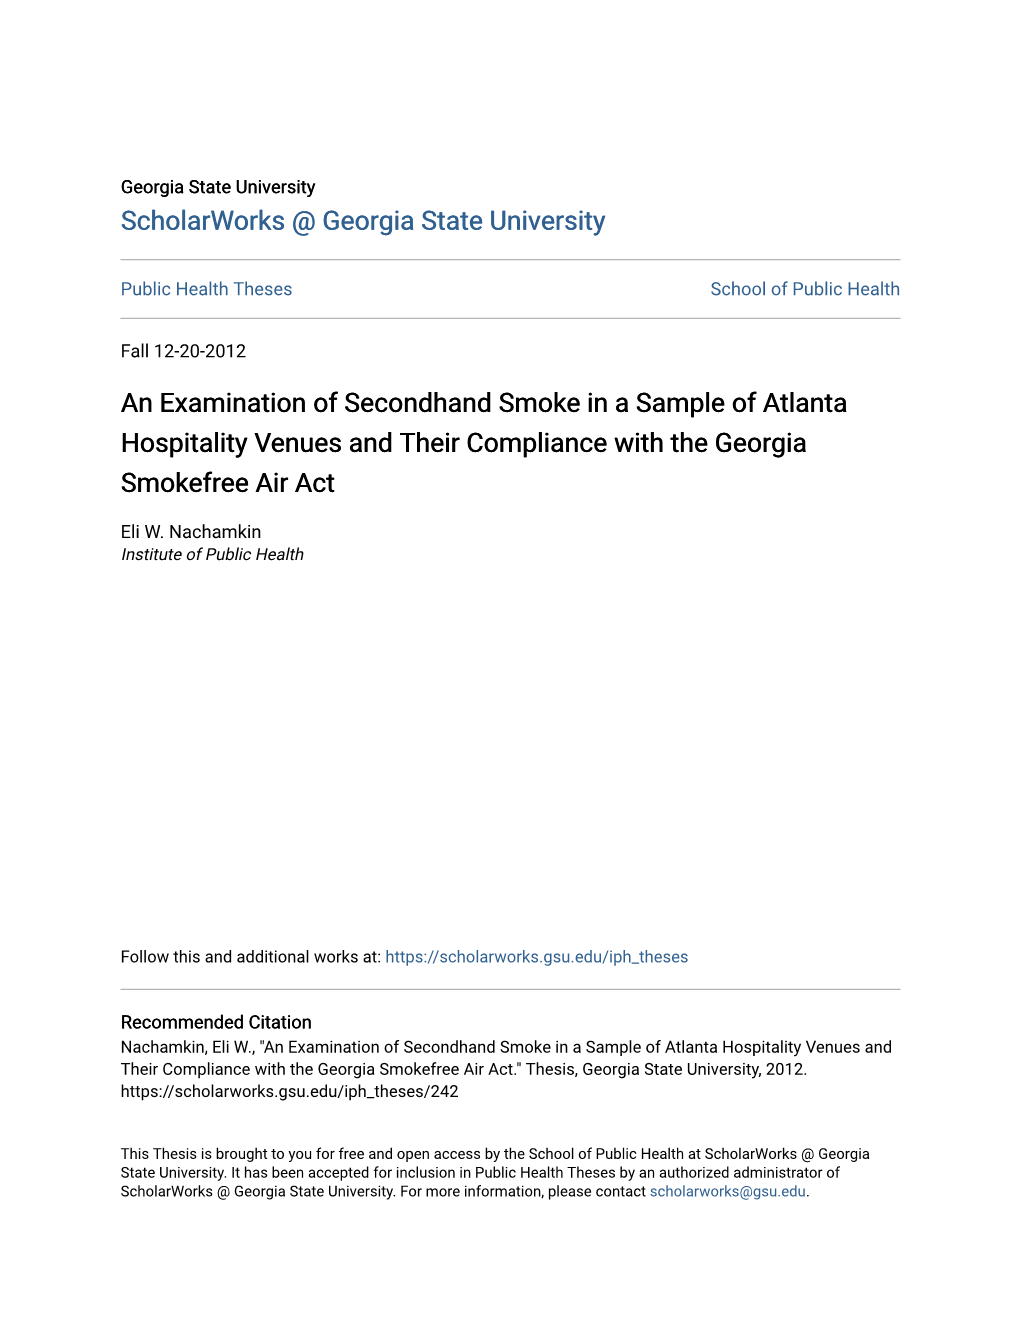 An Examination of Secondhand Smoke in a Sample of Atlanta Hospitality Venues and Their Compliance with the Georgia Smokefree Air Act